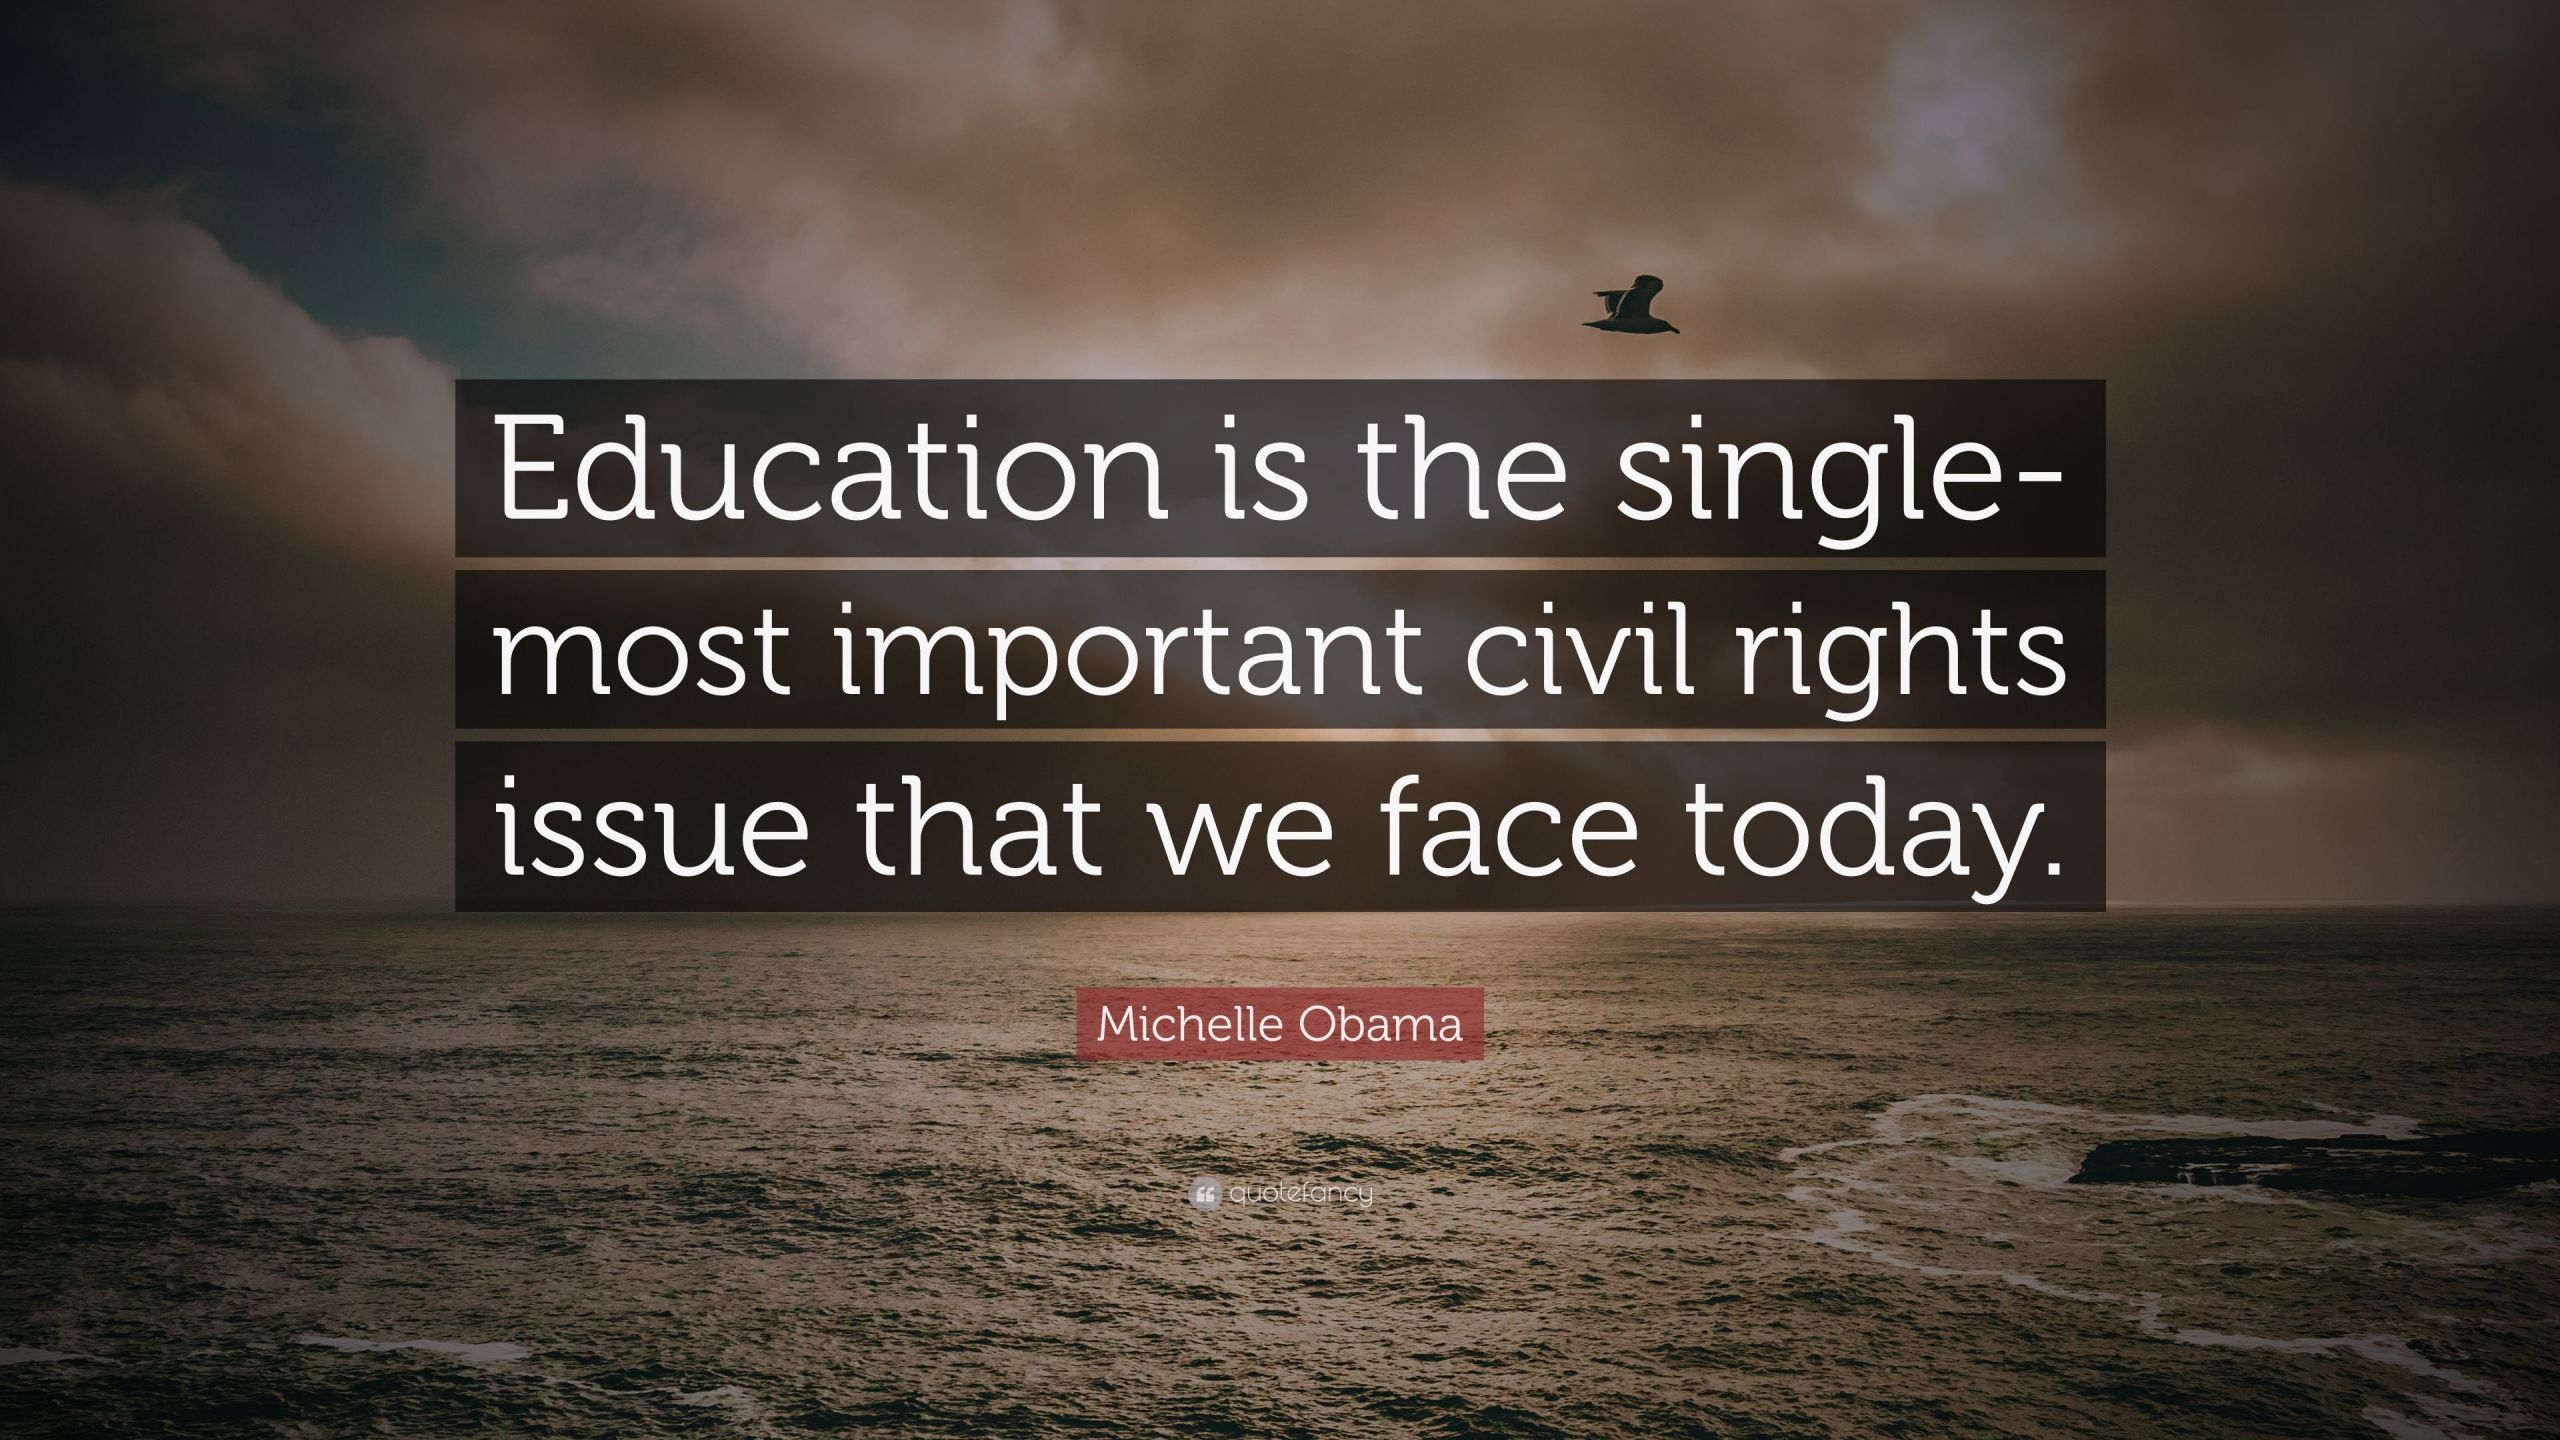 Michelle Obama Education Quotes
 Michelle Obama Quote “Education is the single most